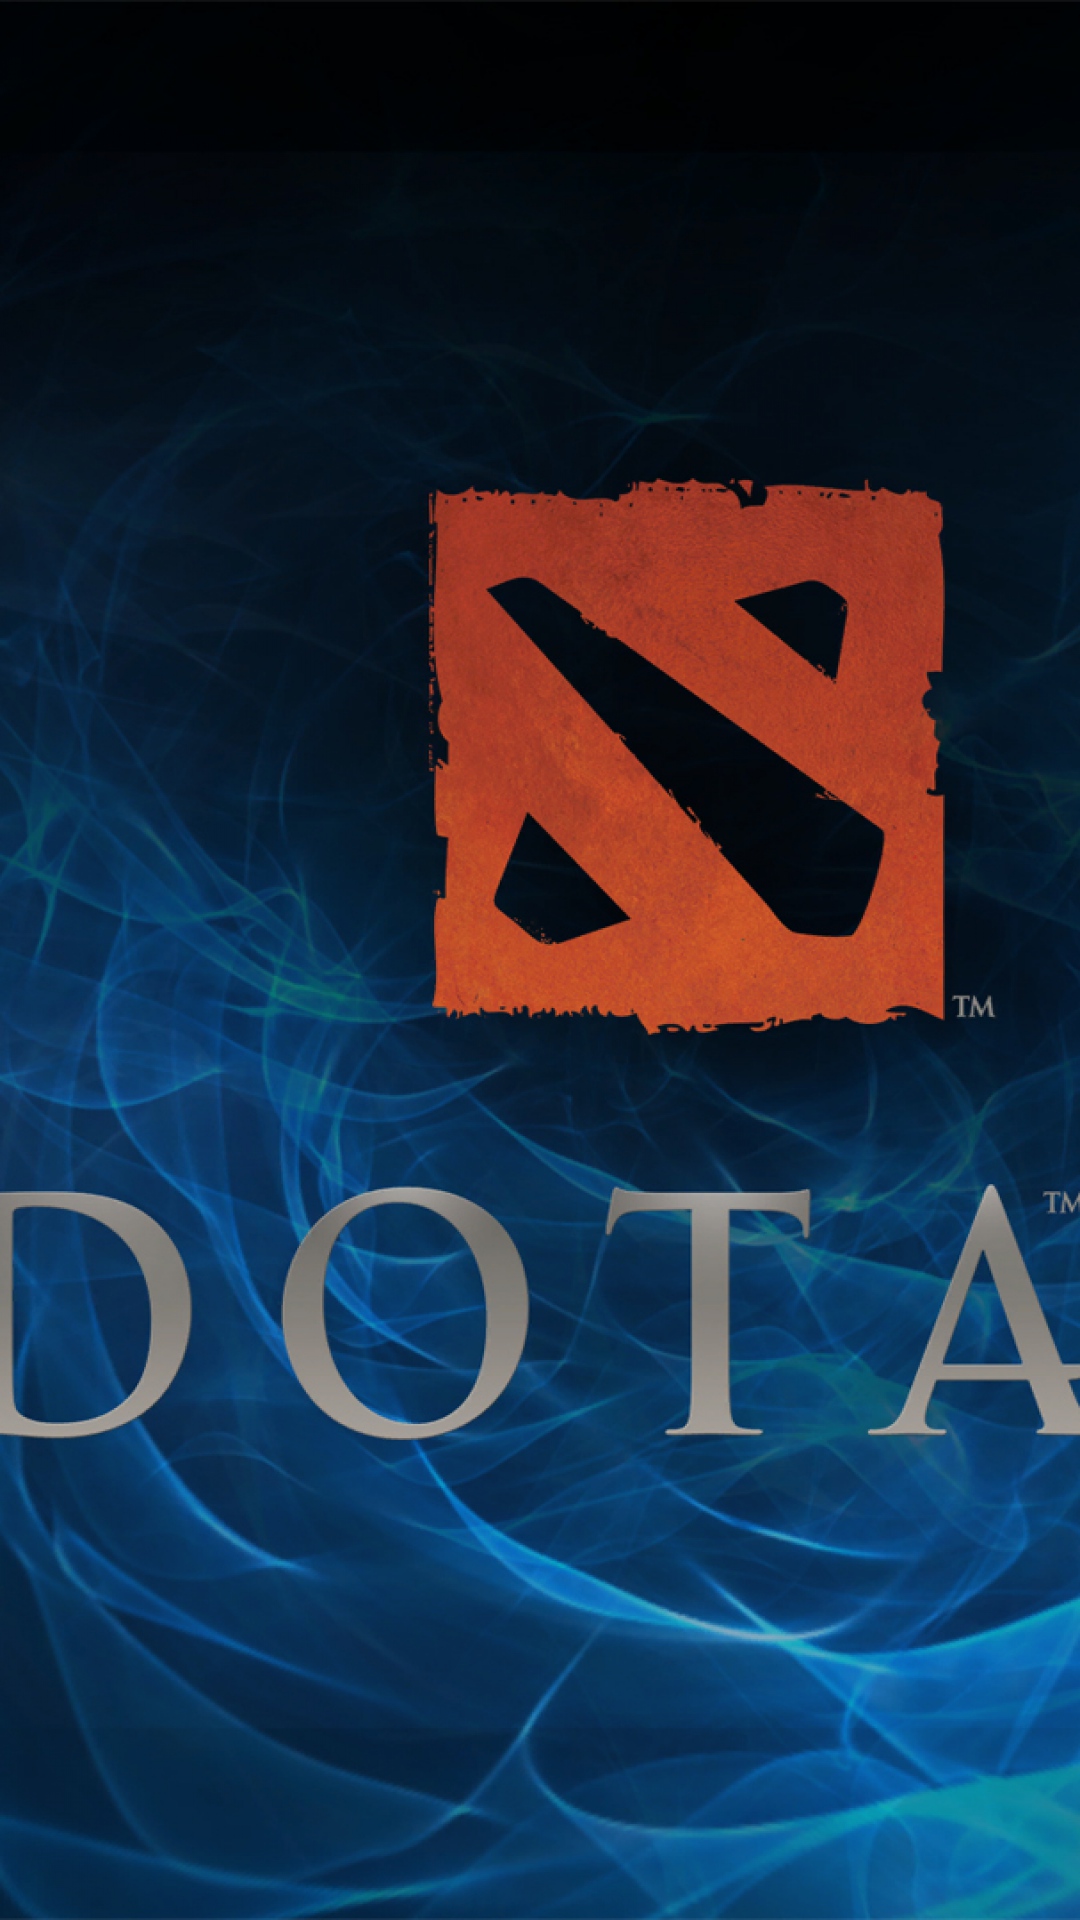 dota 2 wallpaper for iphone,font,blue,text,electric blue,logo